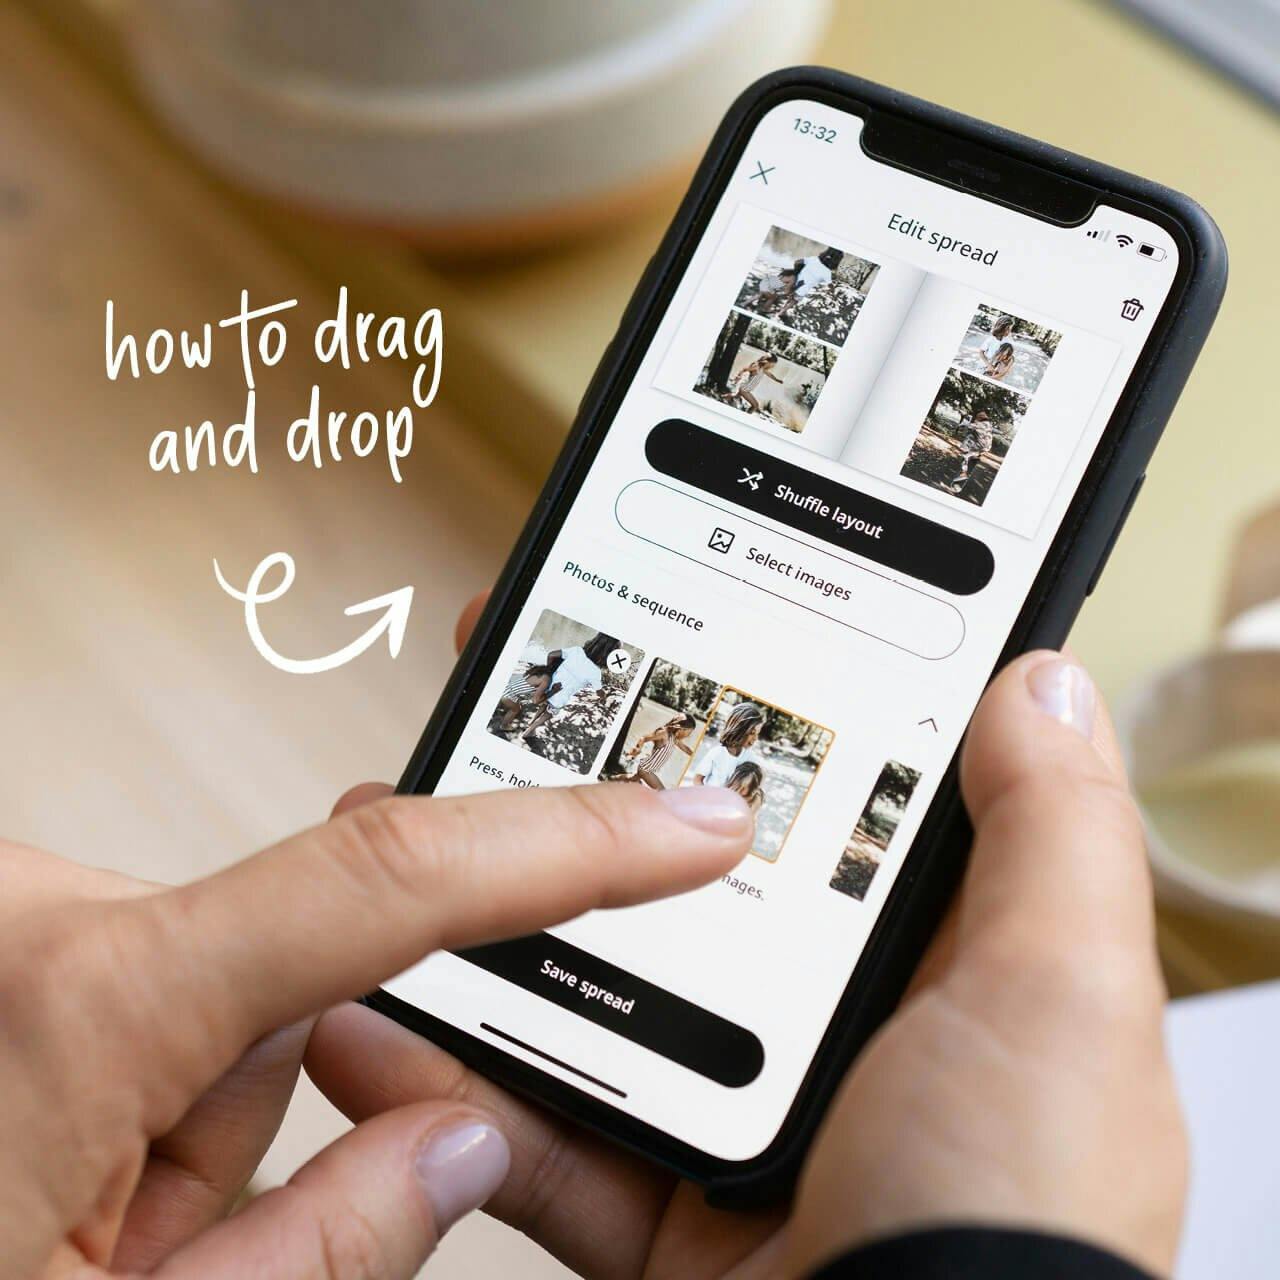 How-to: Drag and drop image